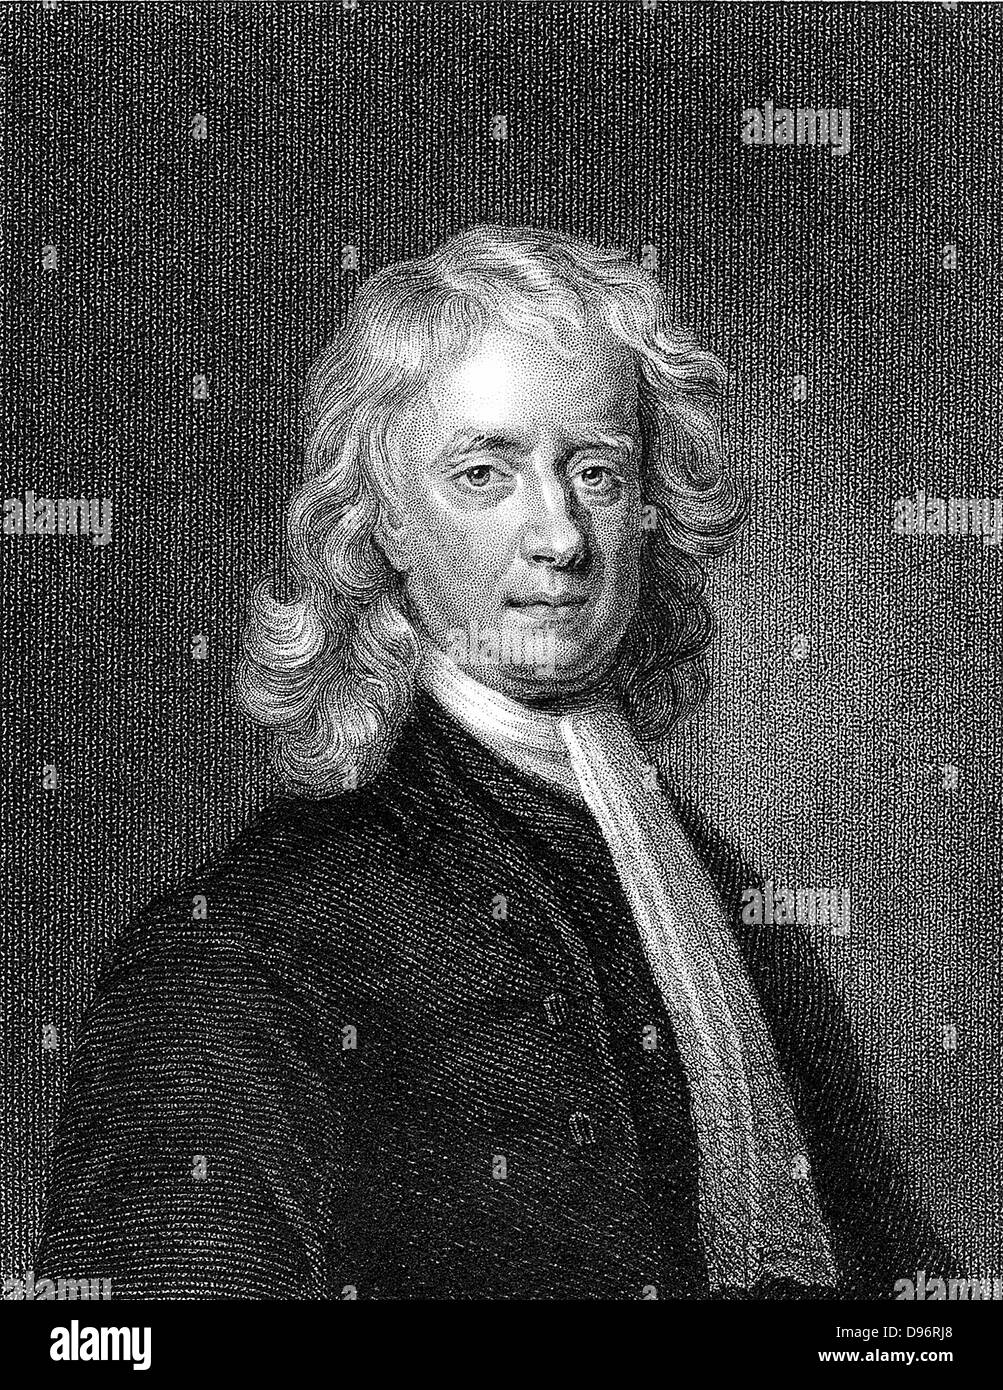 Isaac Newton (1642-1727) English mathematician and physicist. Engraving after the portrait by Enoch Seeman. Stock Photo